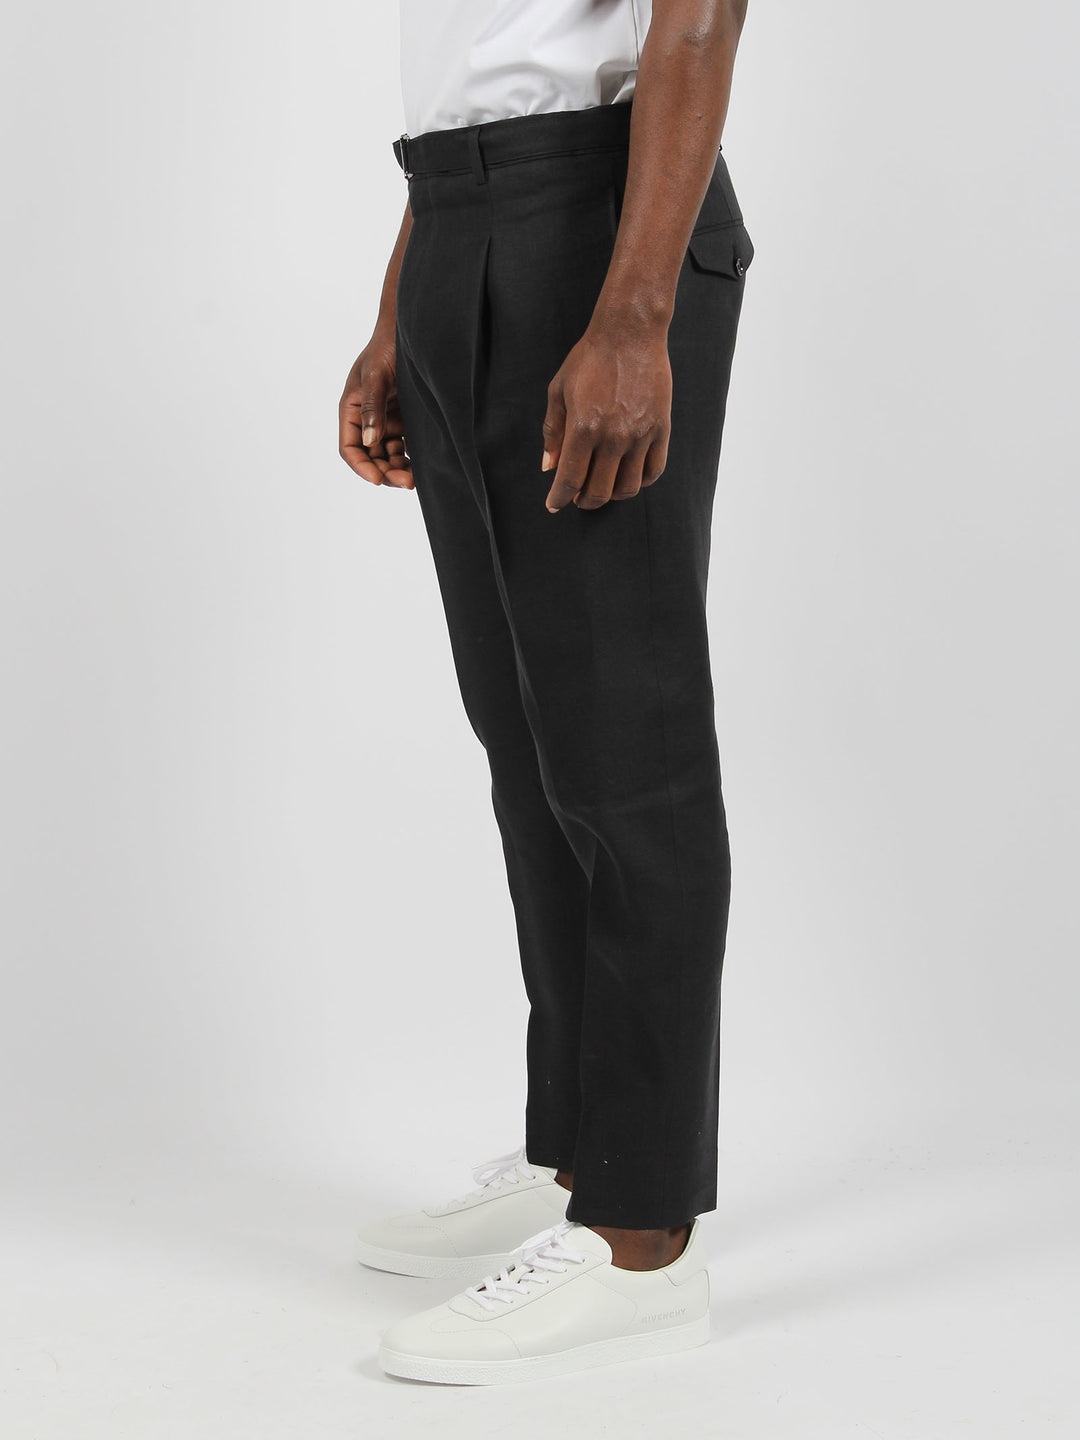 Andy linen trousers